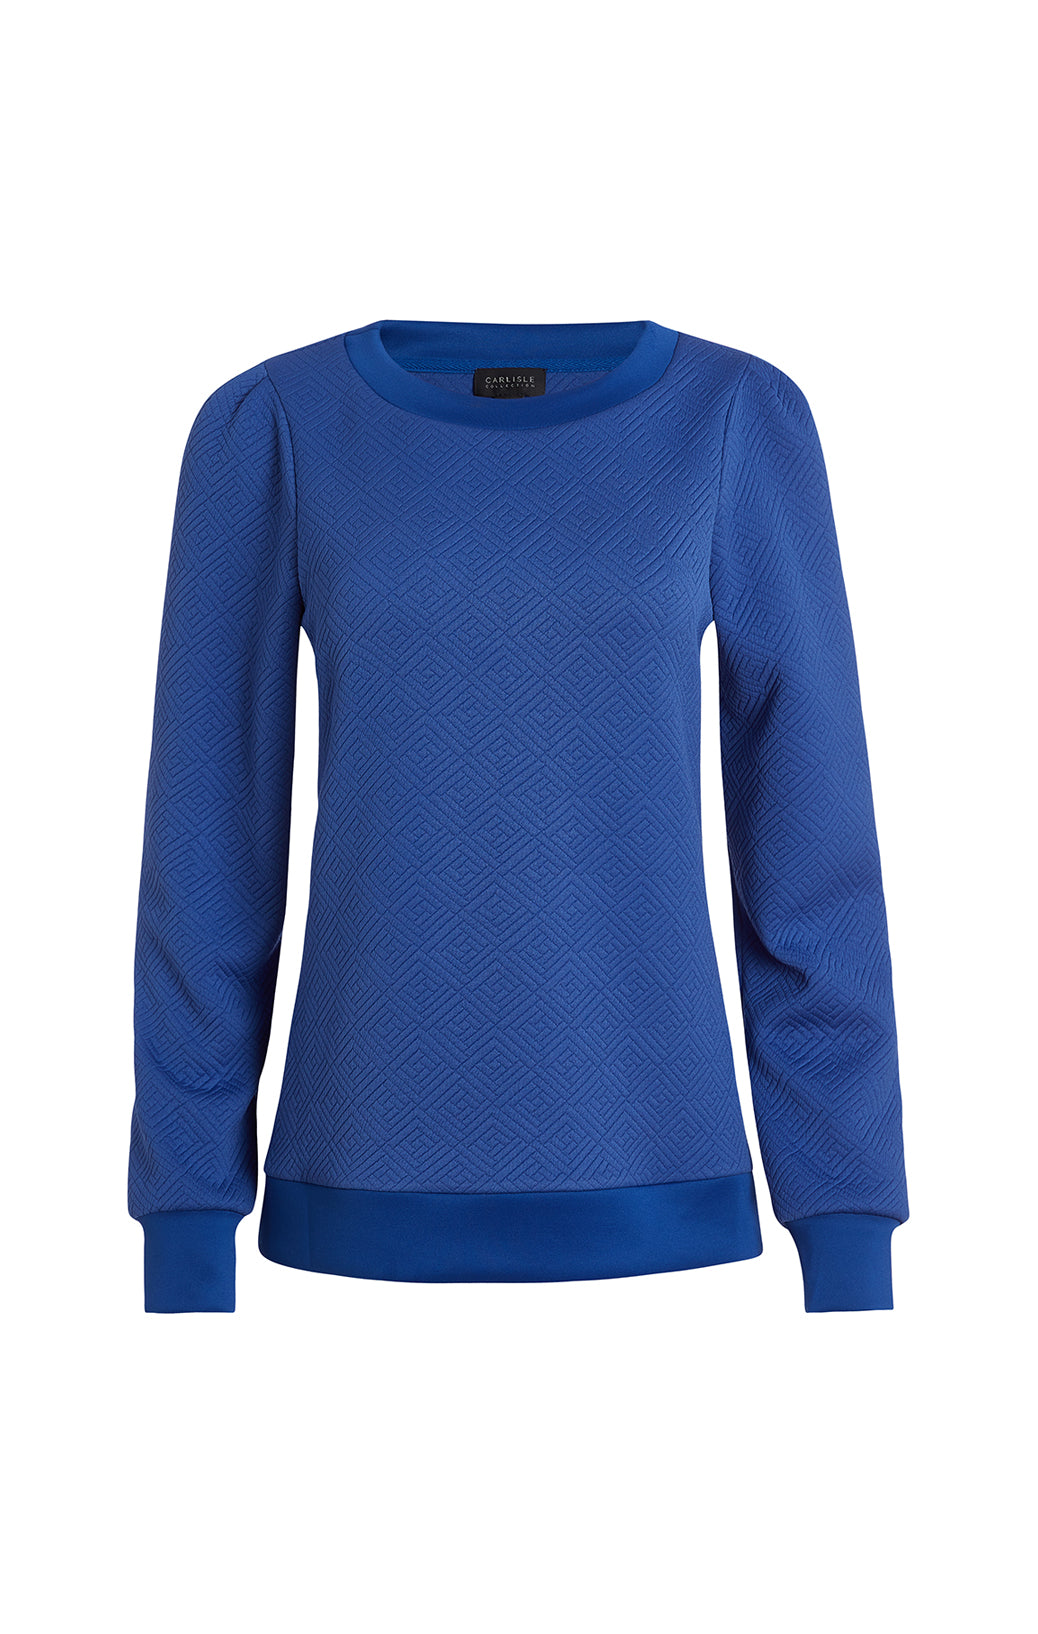 Compass - Organic Cotton Knit Top -  Product Image